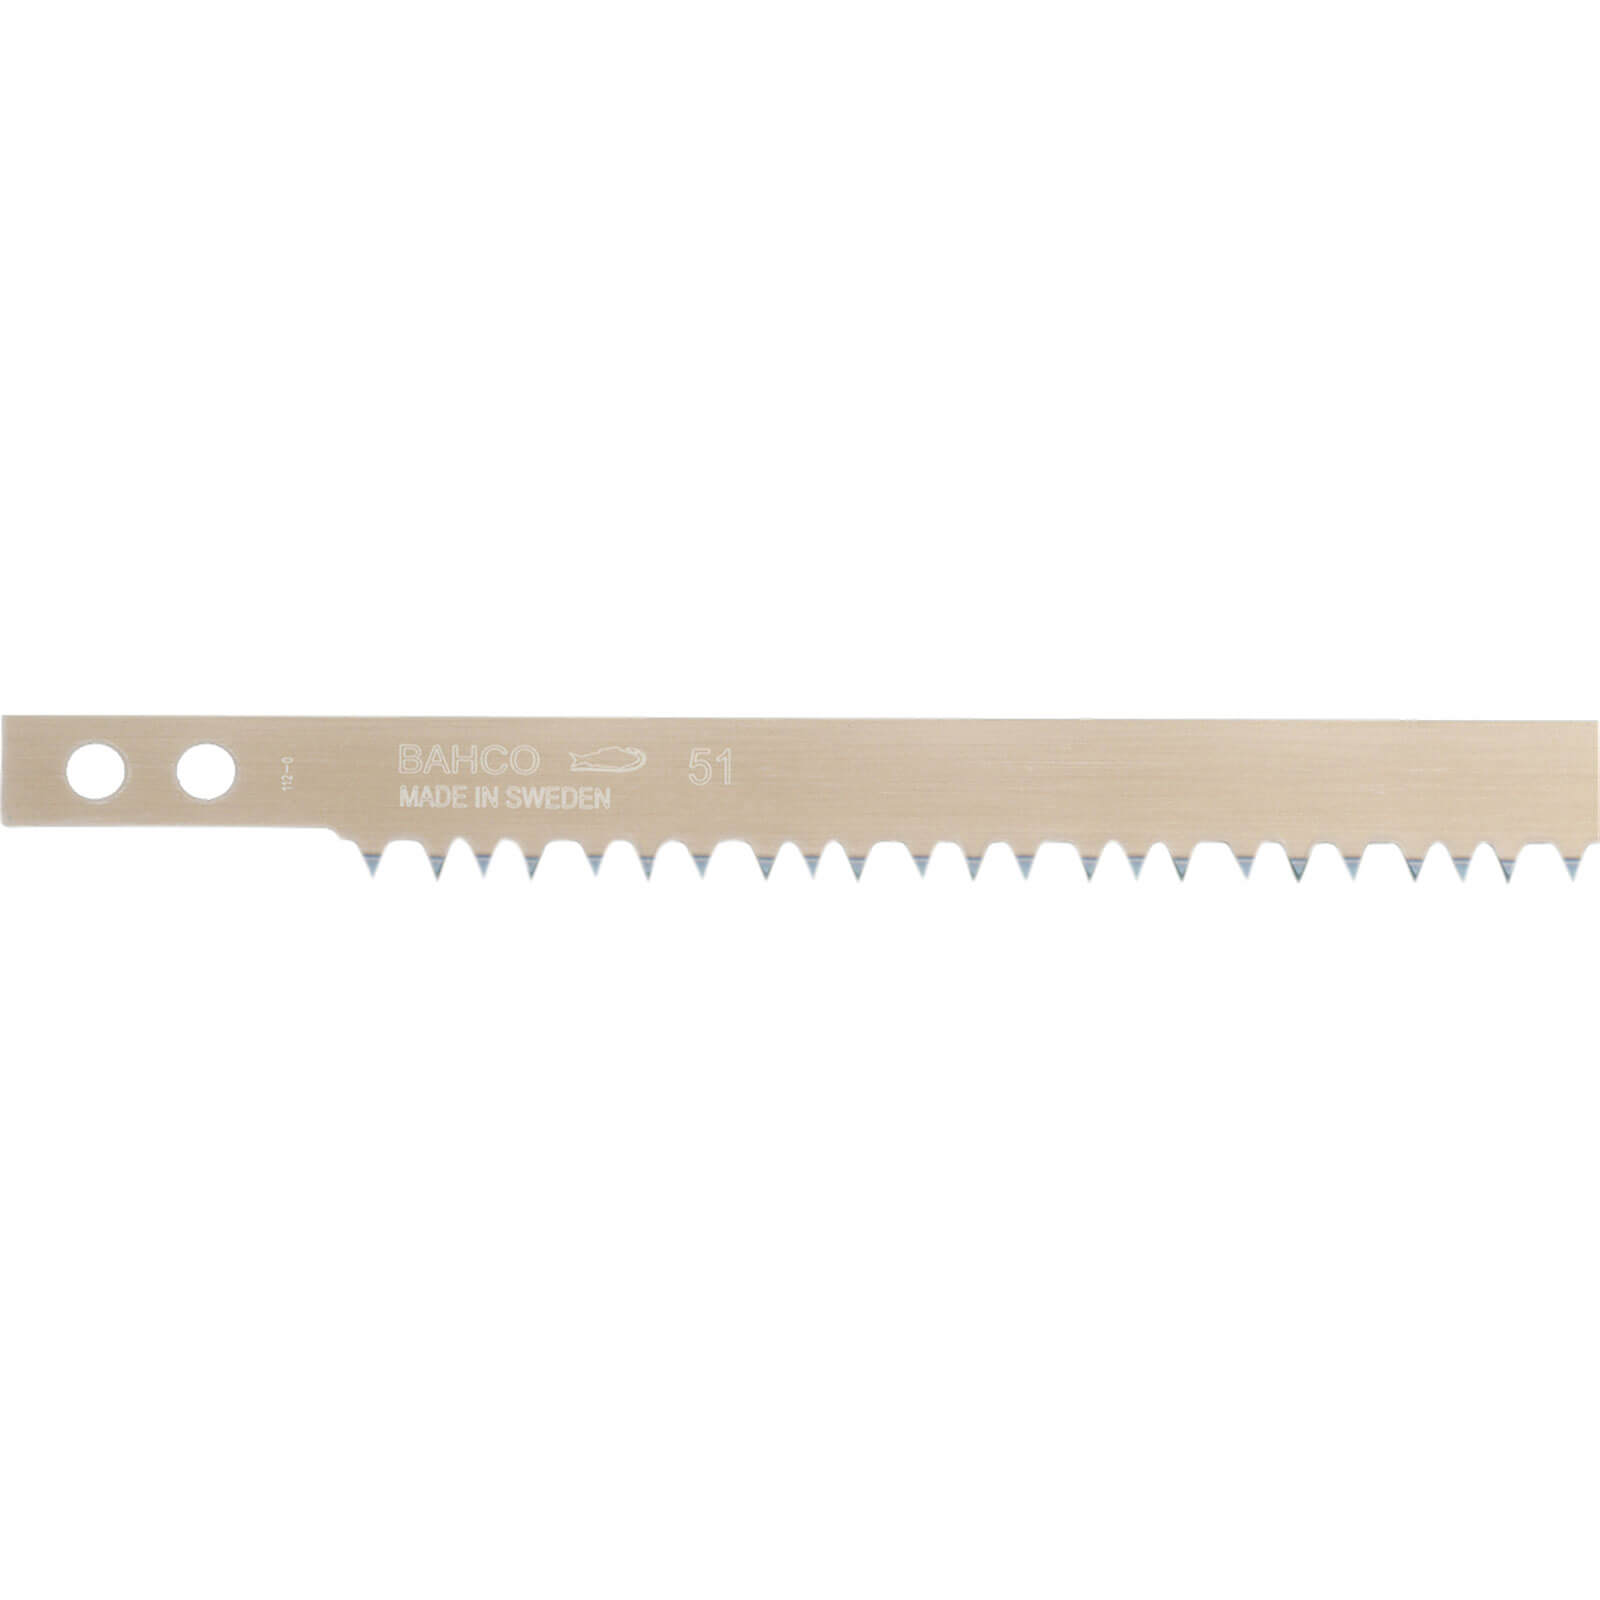 Bahco 21 Tooth Hard Point Bowsaw Blade 21" / 530mm All Purpose